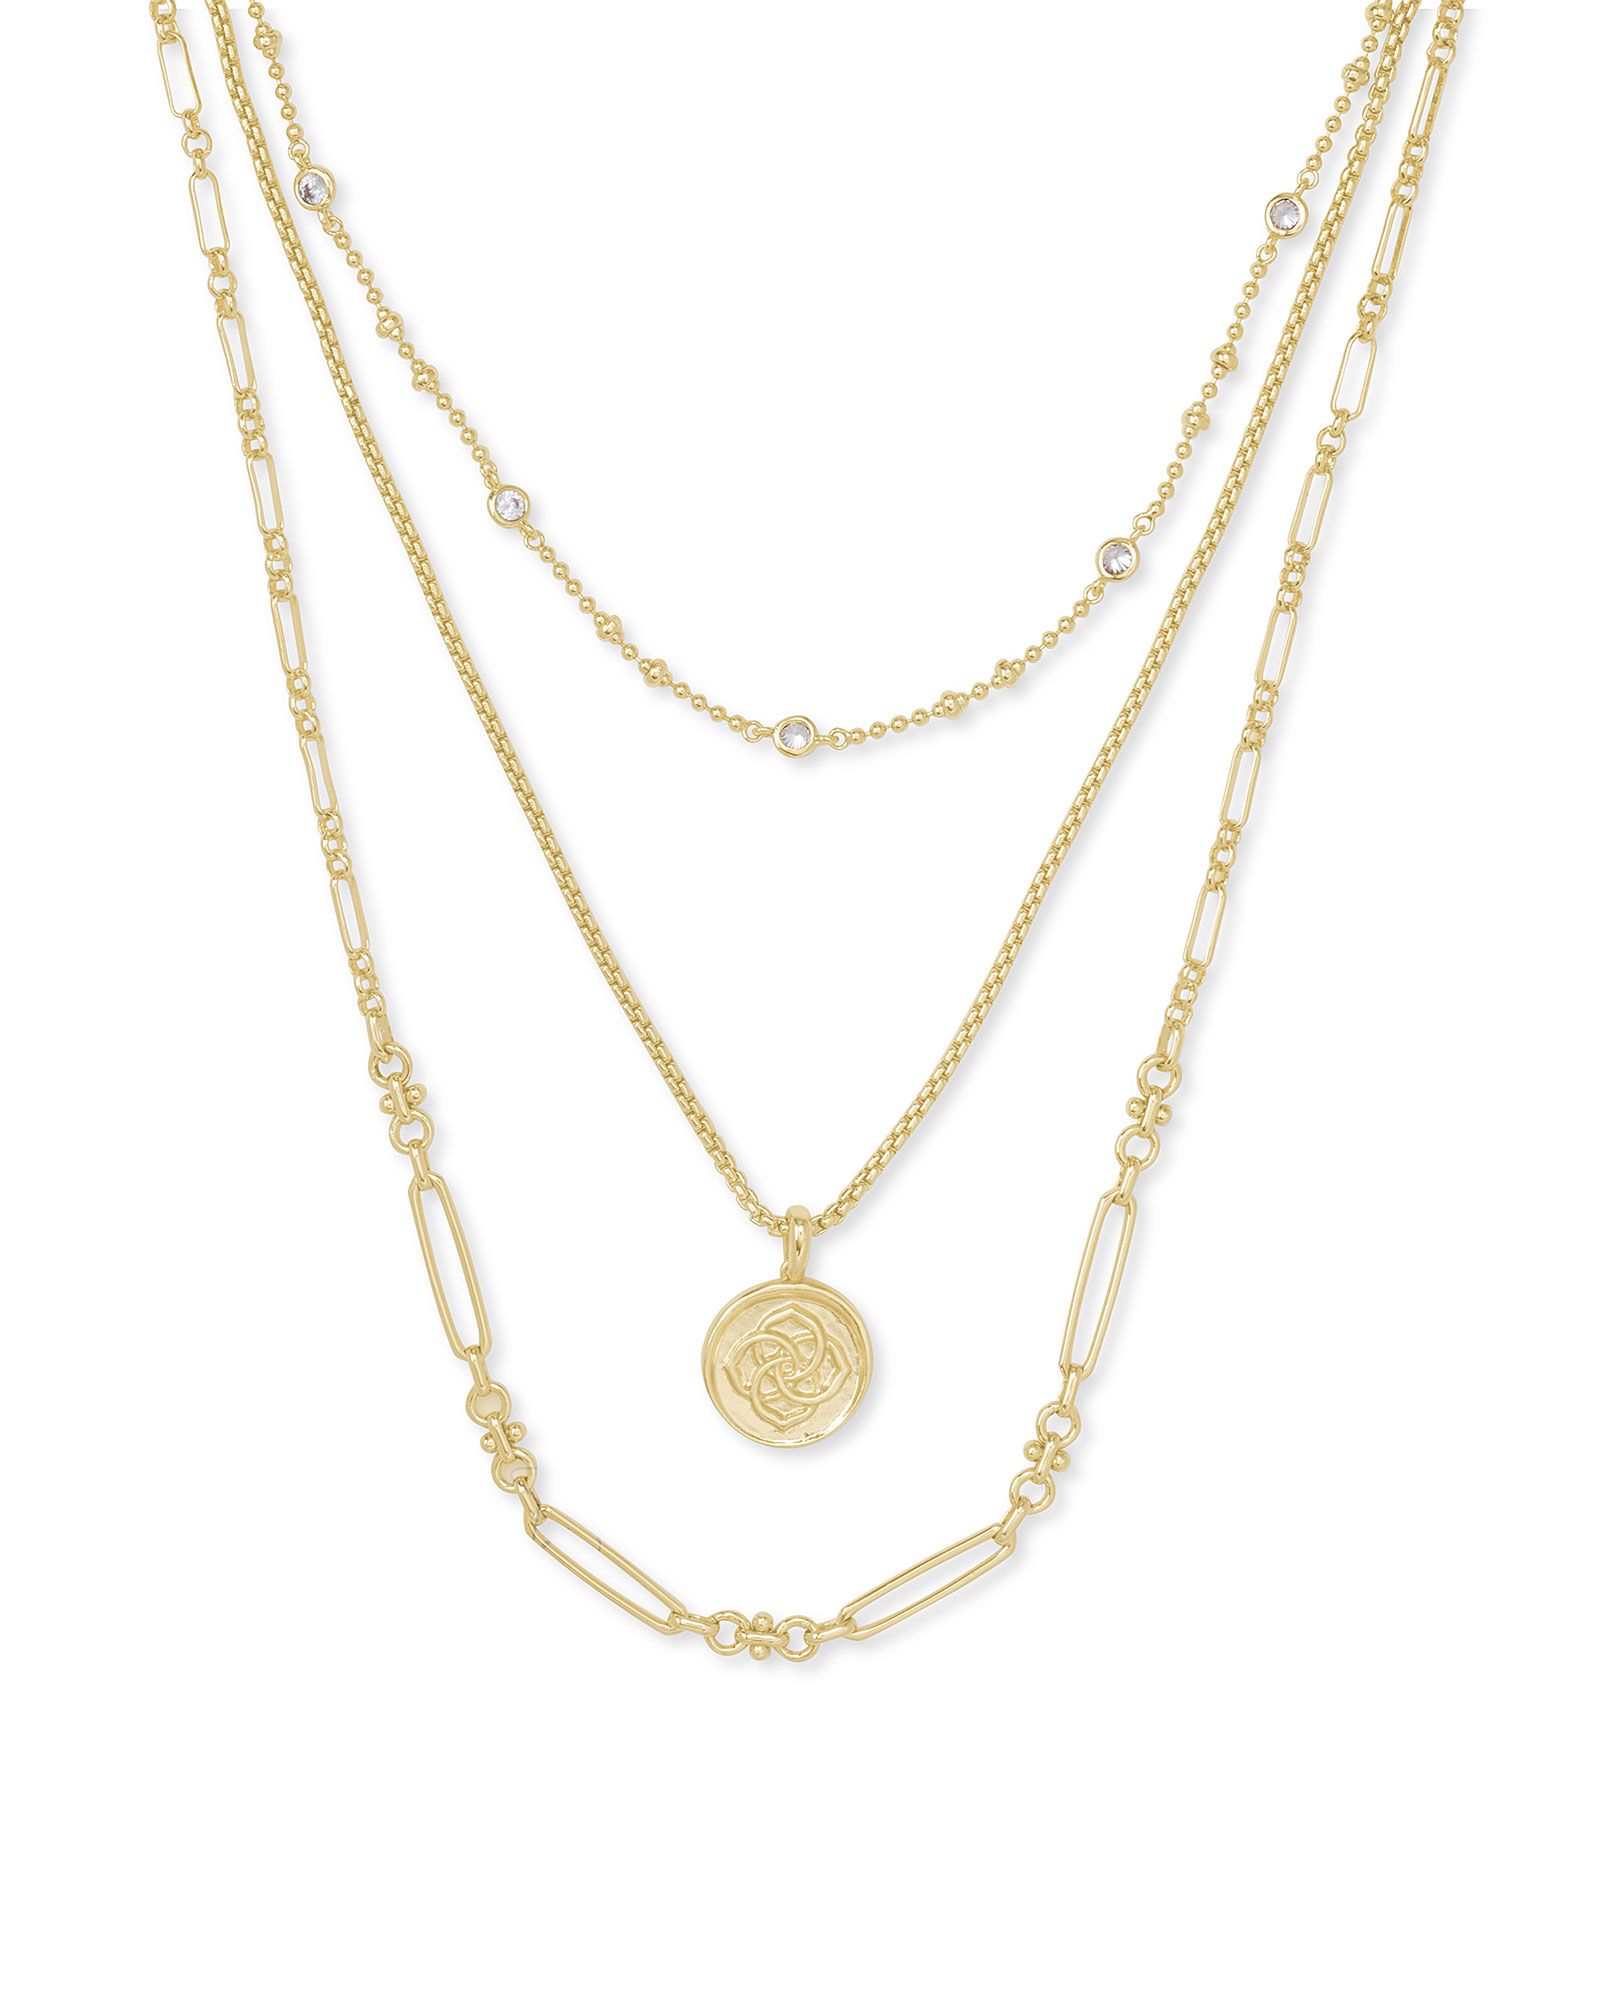 Medallion Coin Multi Strand Necklace in Gold | Kendra Scott